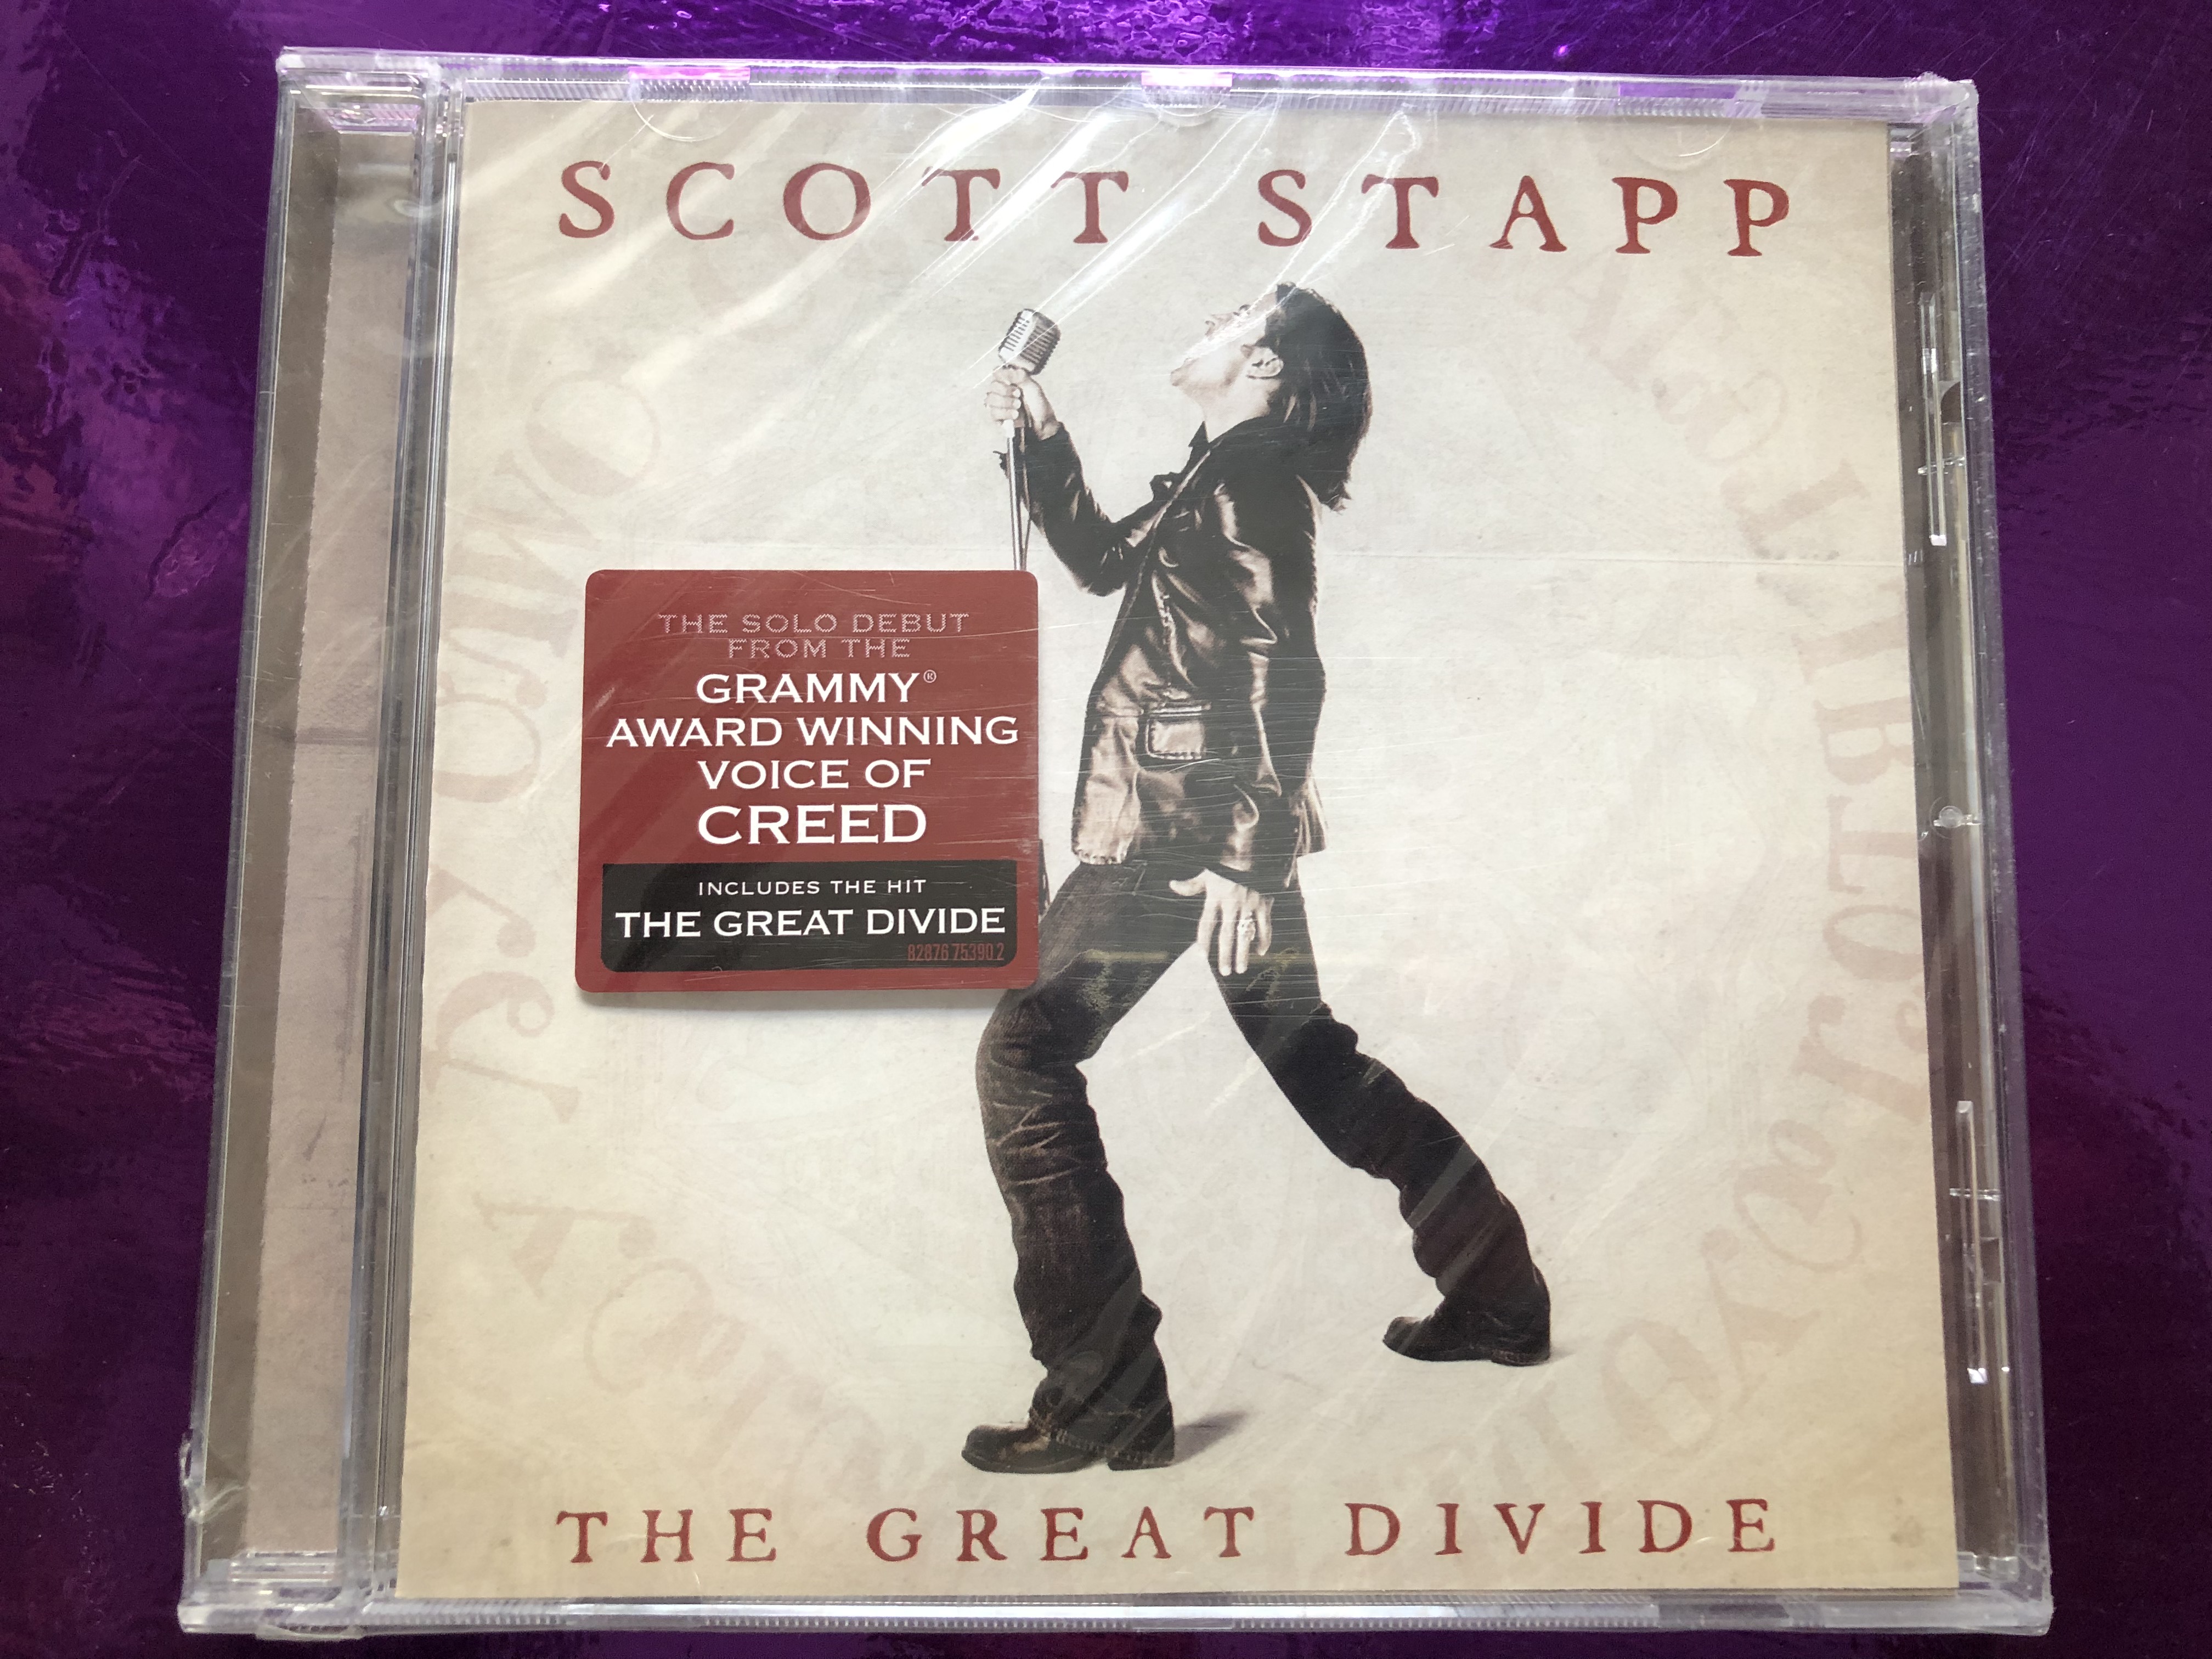 scott-stapp-the-great-divide-the-solo-debut-from-the-grammy-award-winning-voice-of-creed-includes-the-hit-the-great-divide-wind-up-audio-cd-2005-82876753902-1-.jpg